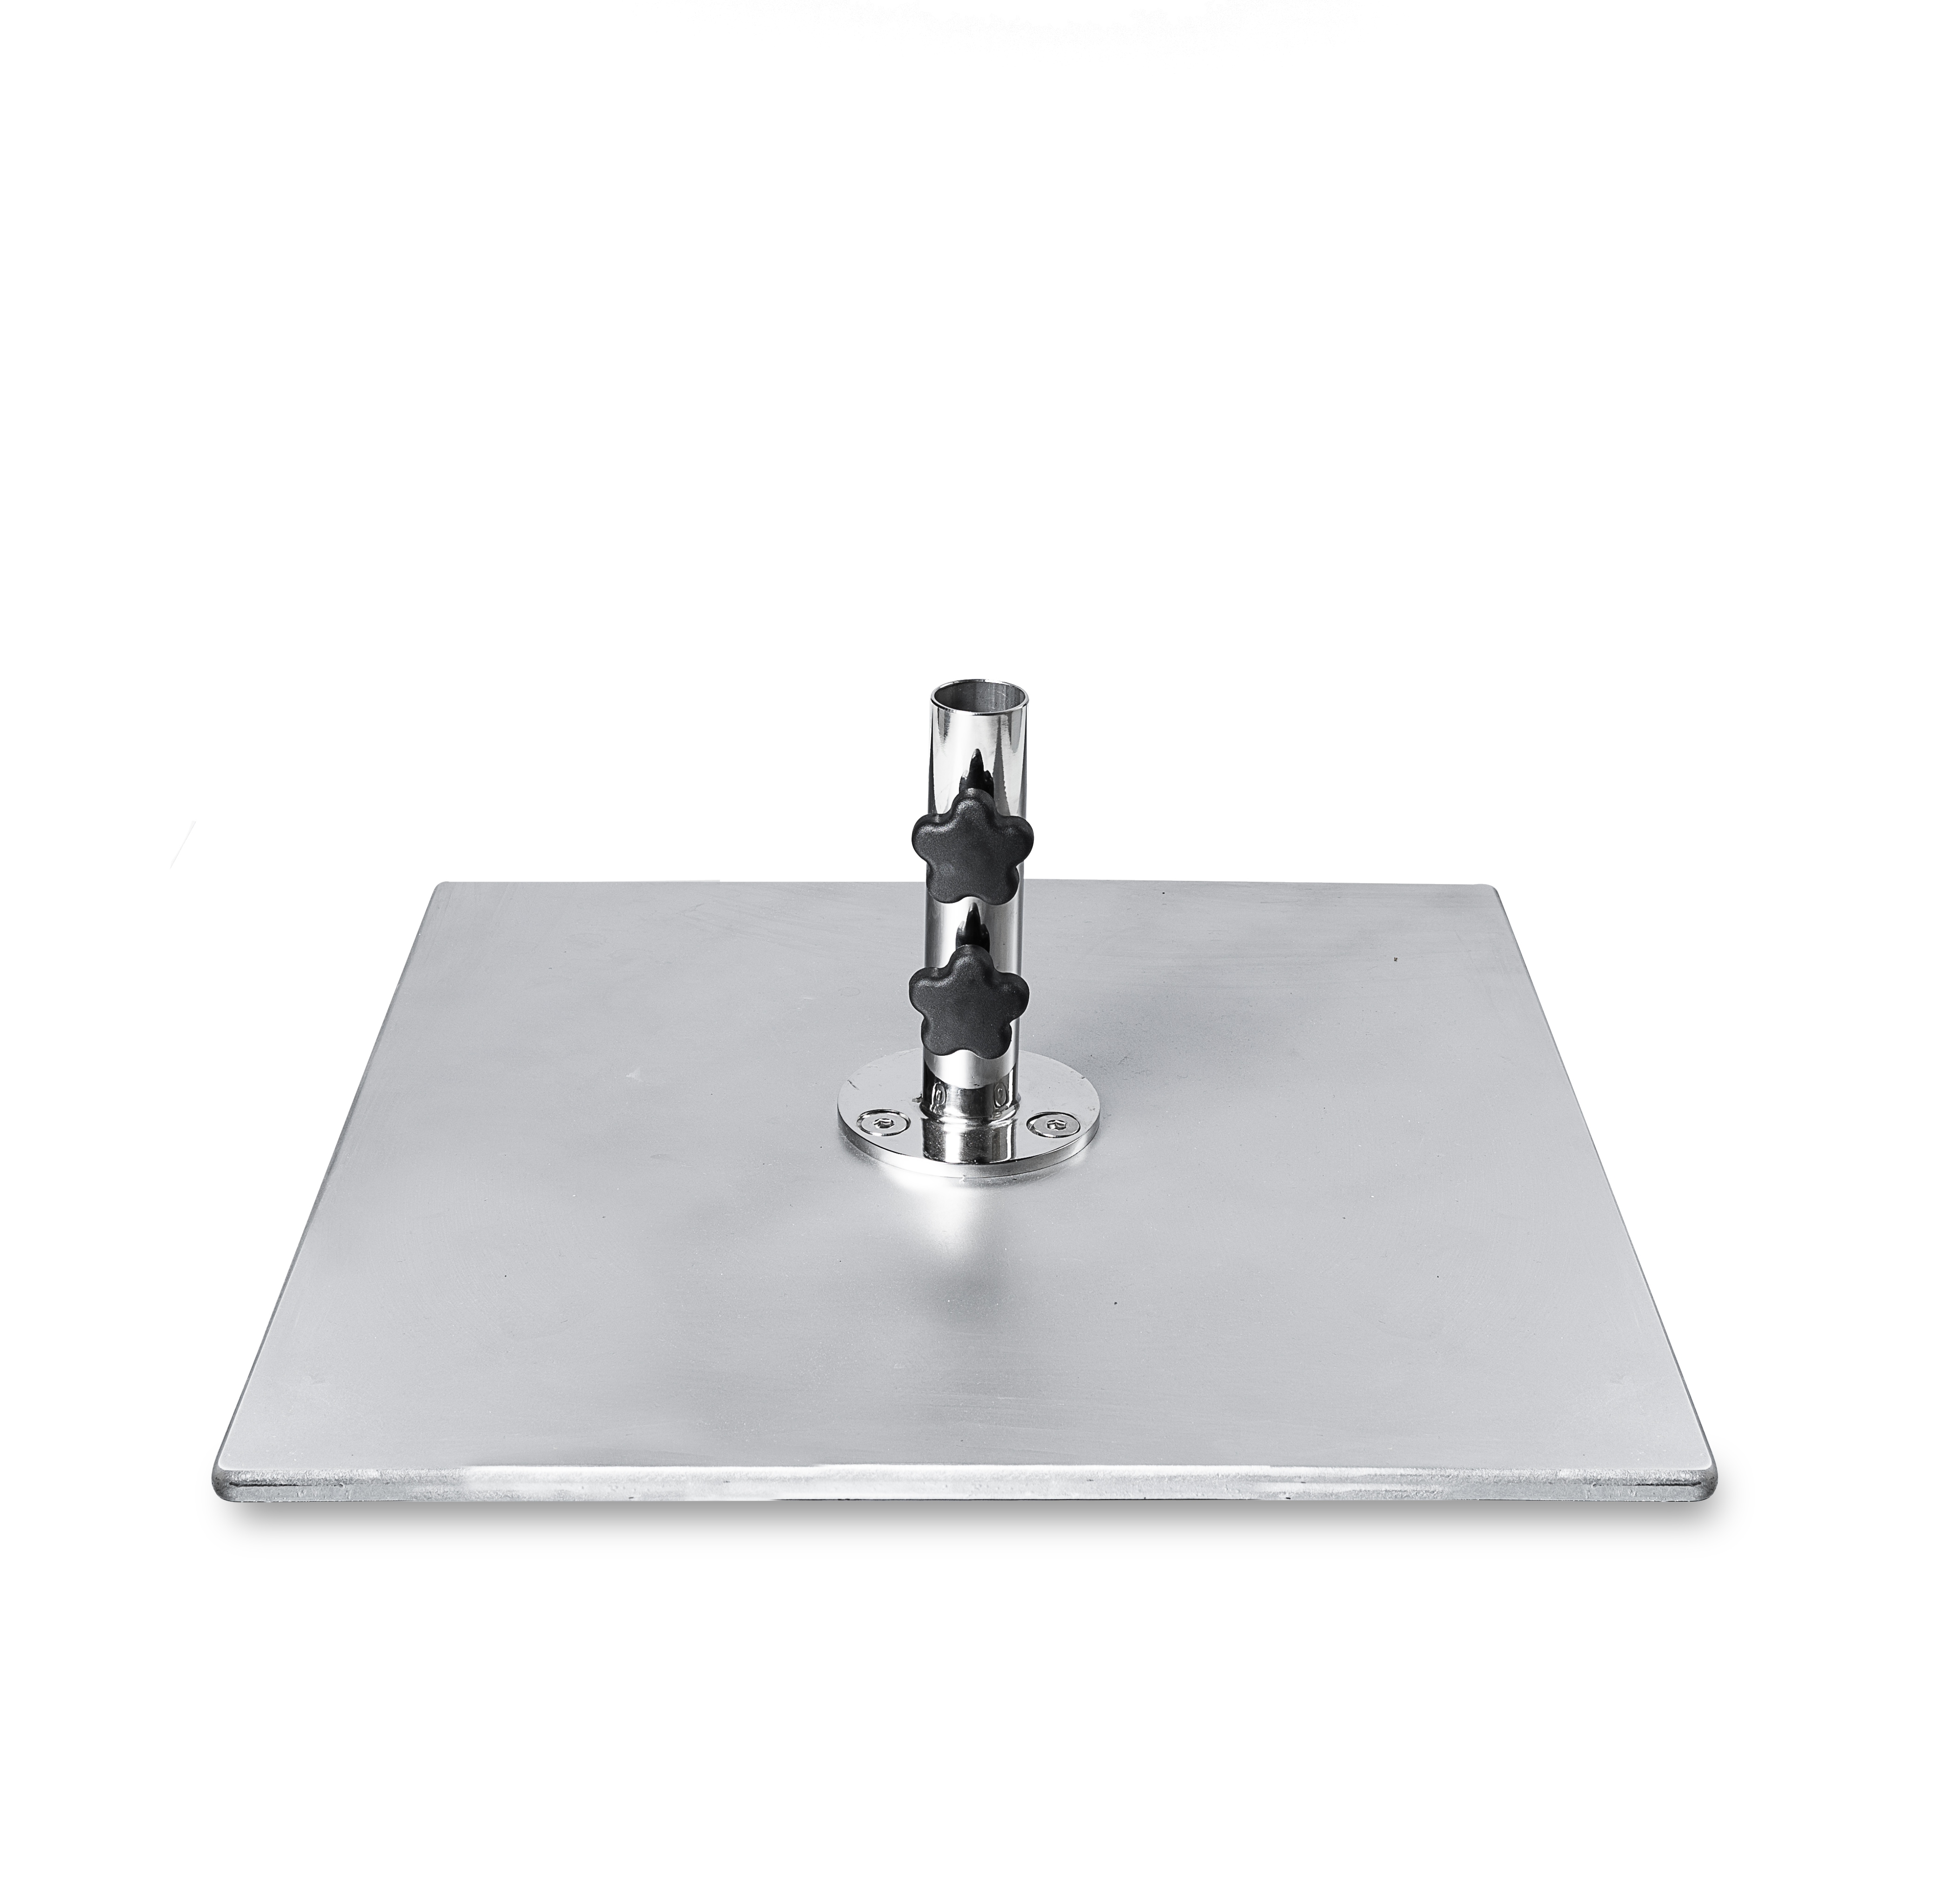 20″ Square Galvanized Steel Plate Base-70 Pounds
